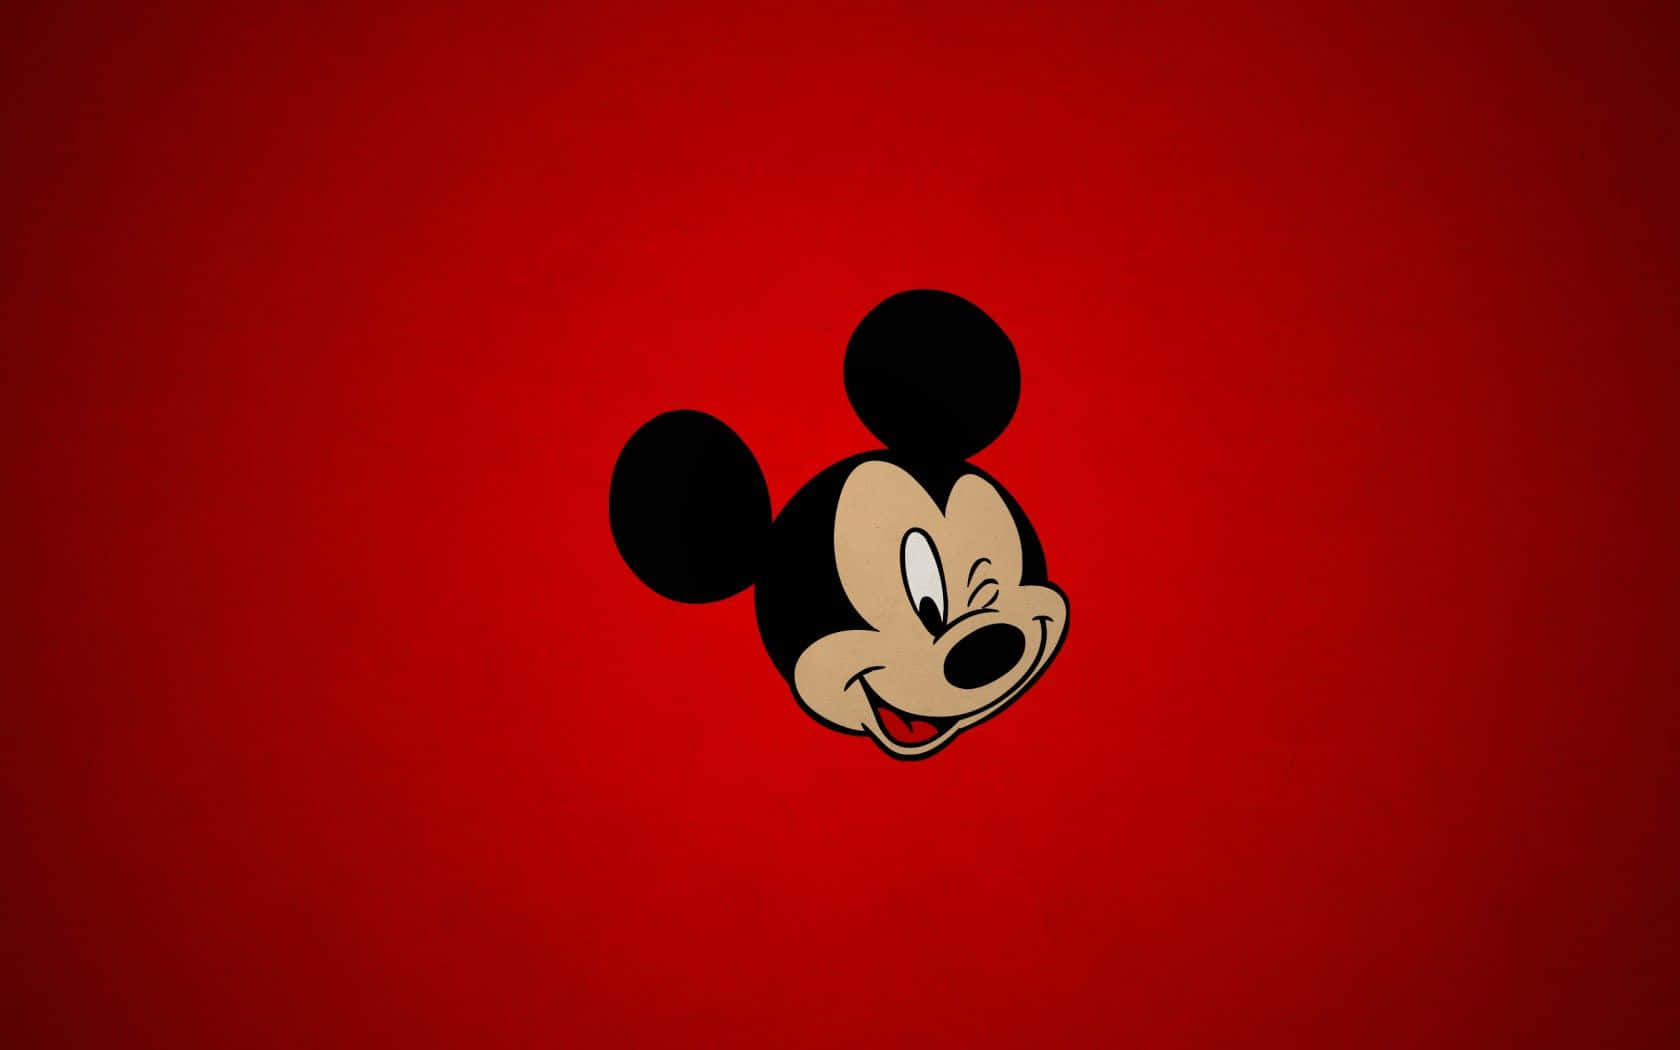 A Cute Mickey Mouse Cartoon Shows The Joyous Character Smiling Brightly.